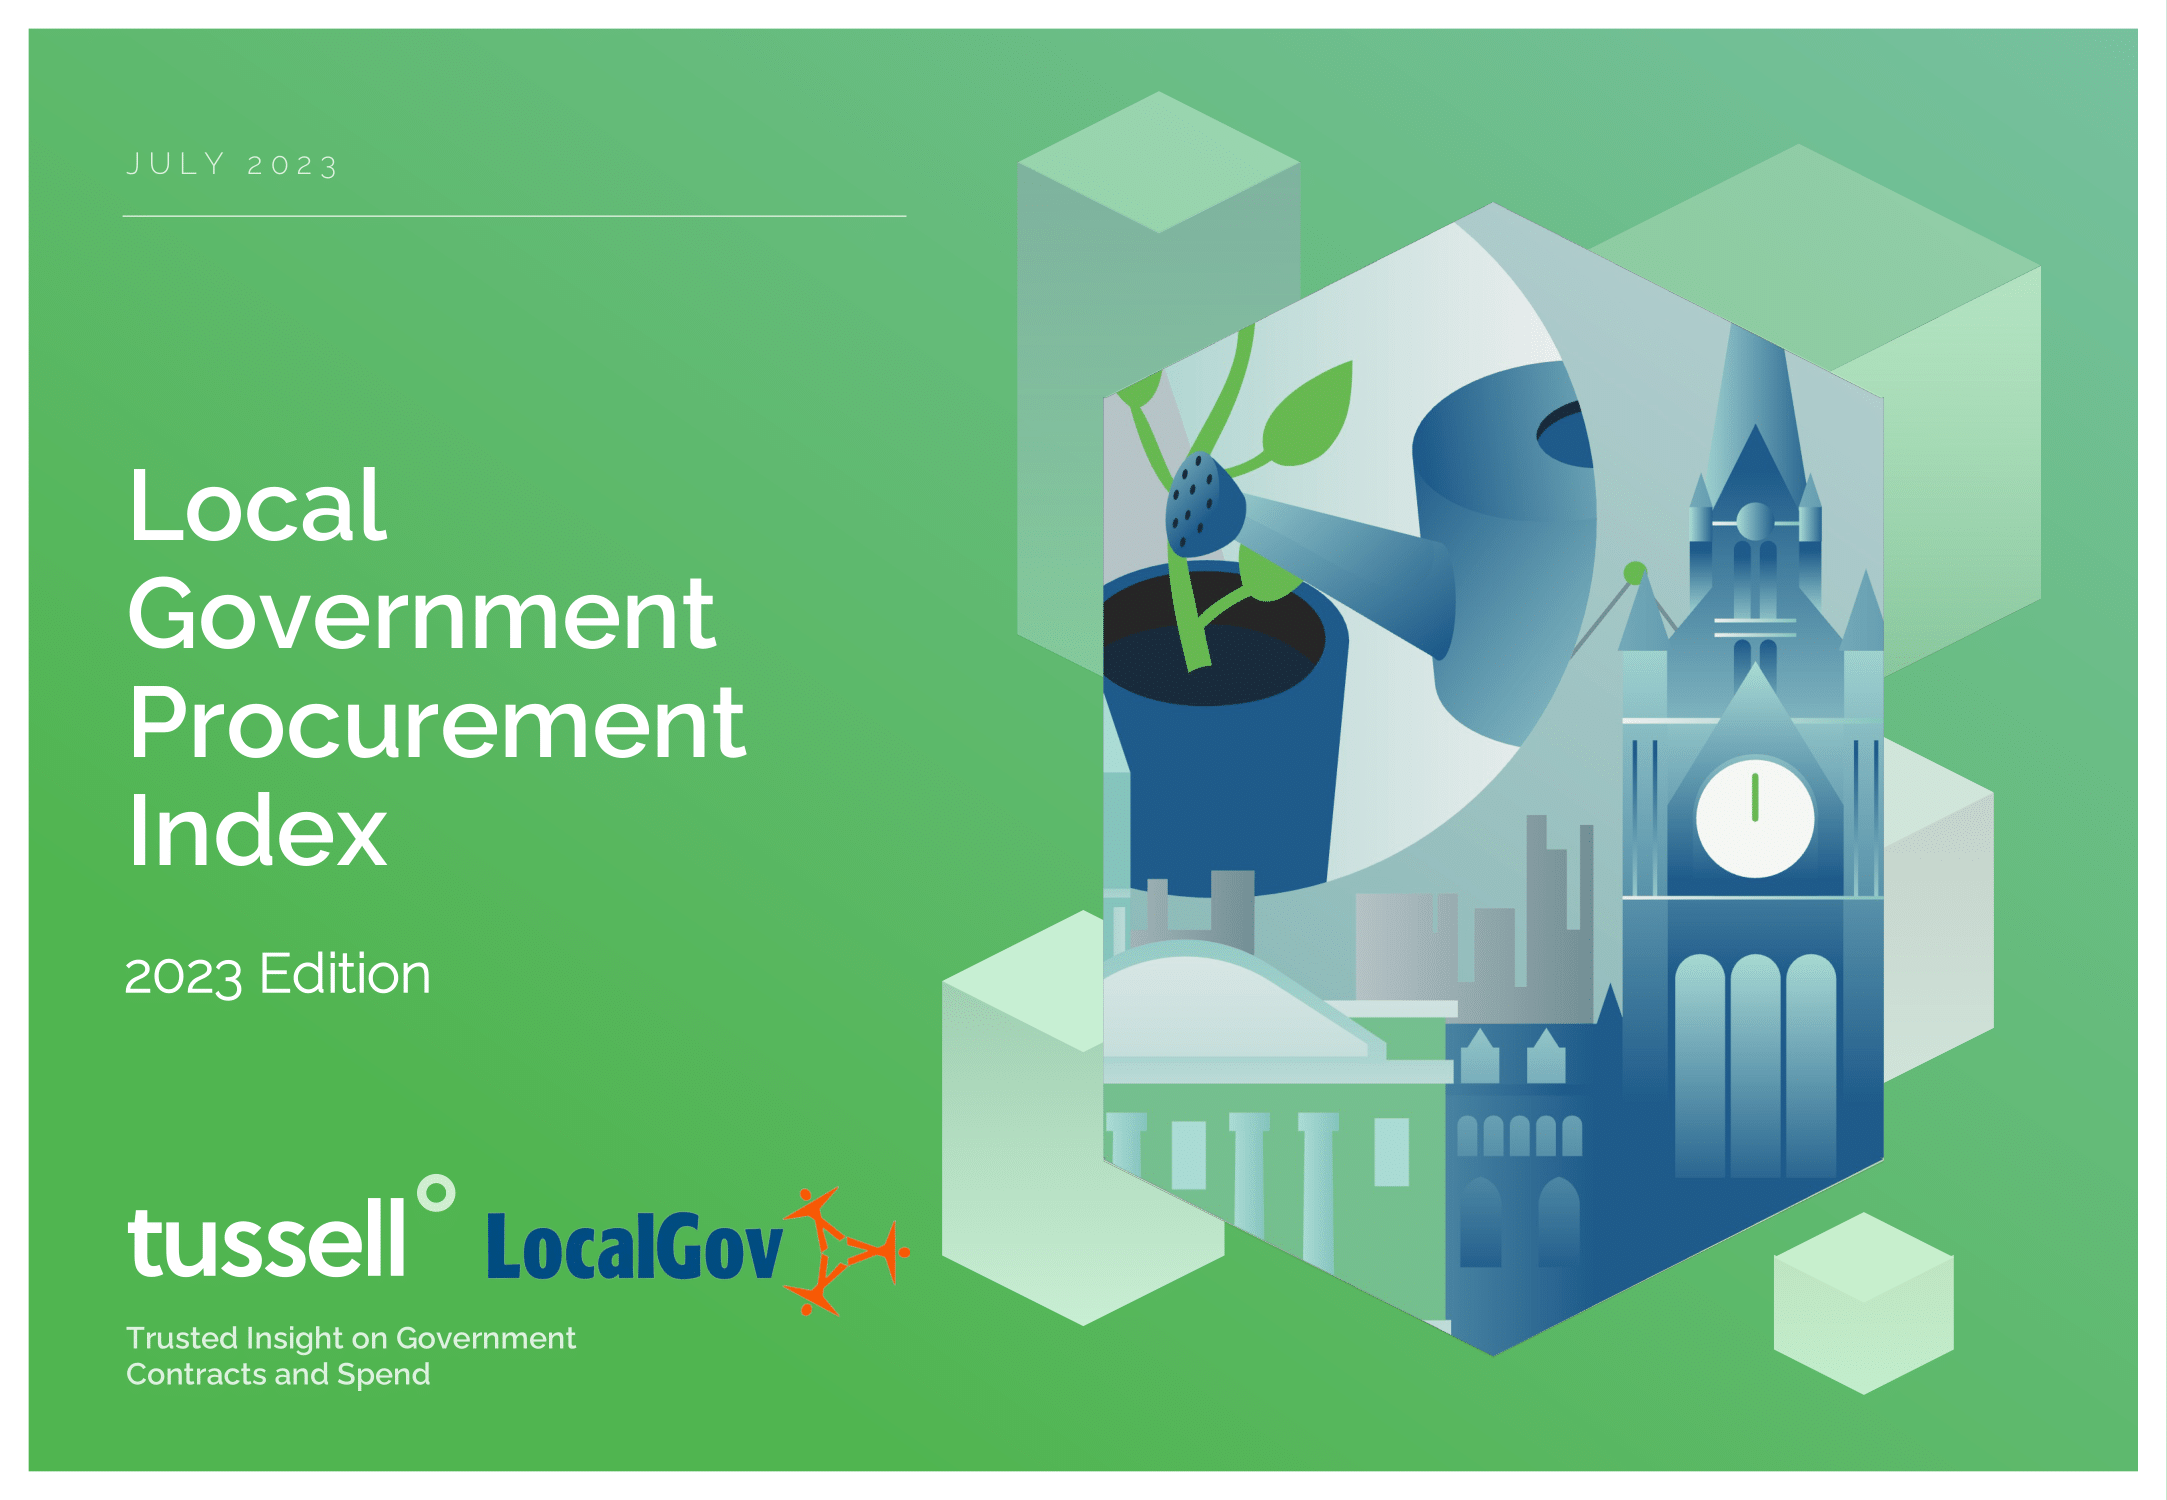 Tussell - Local Government Procurement Index 2023 Report - 2023_07_20-1